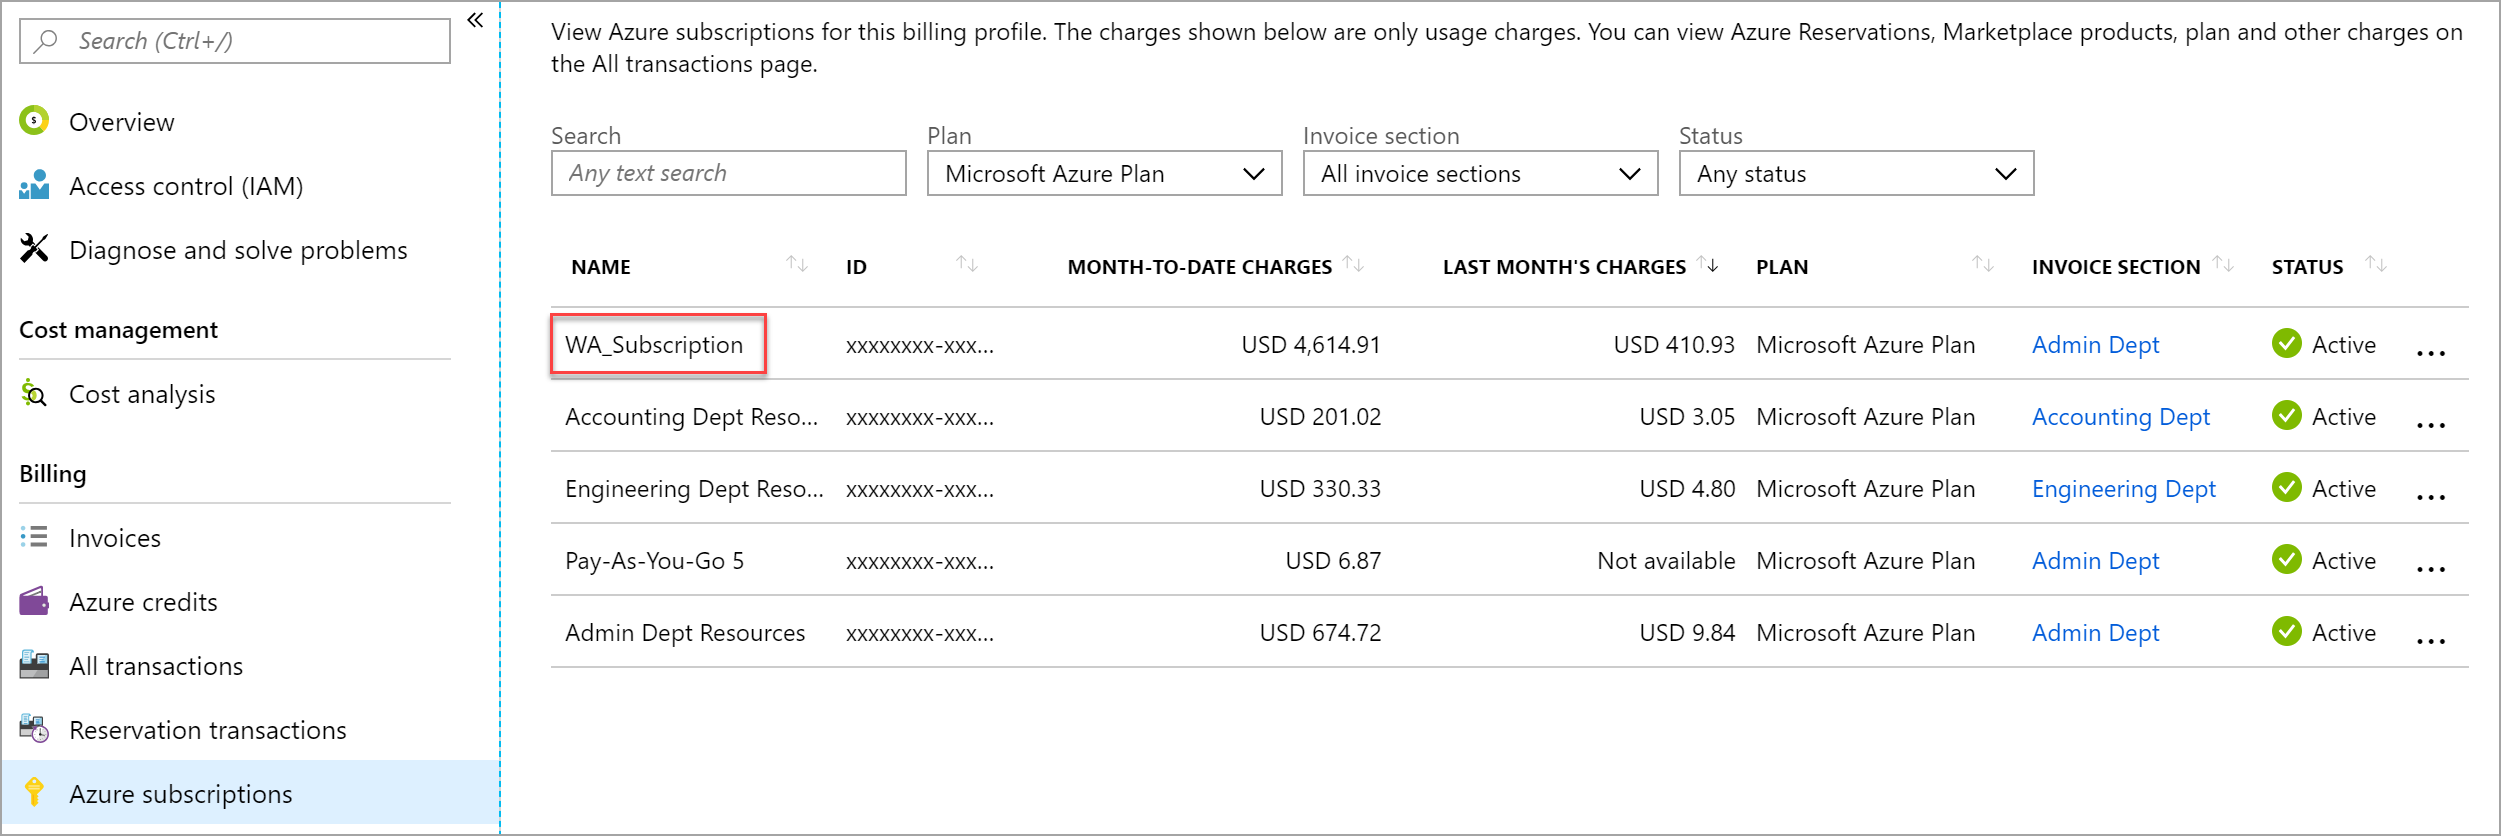 Screenshot showing the list of subscriptions in the Azure portal with one subscription called out.